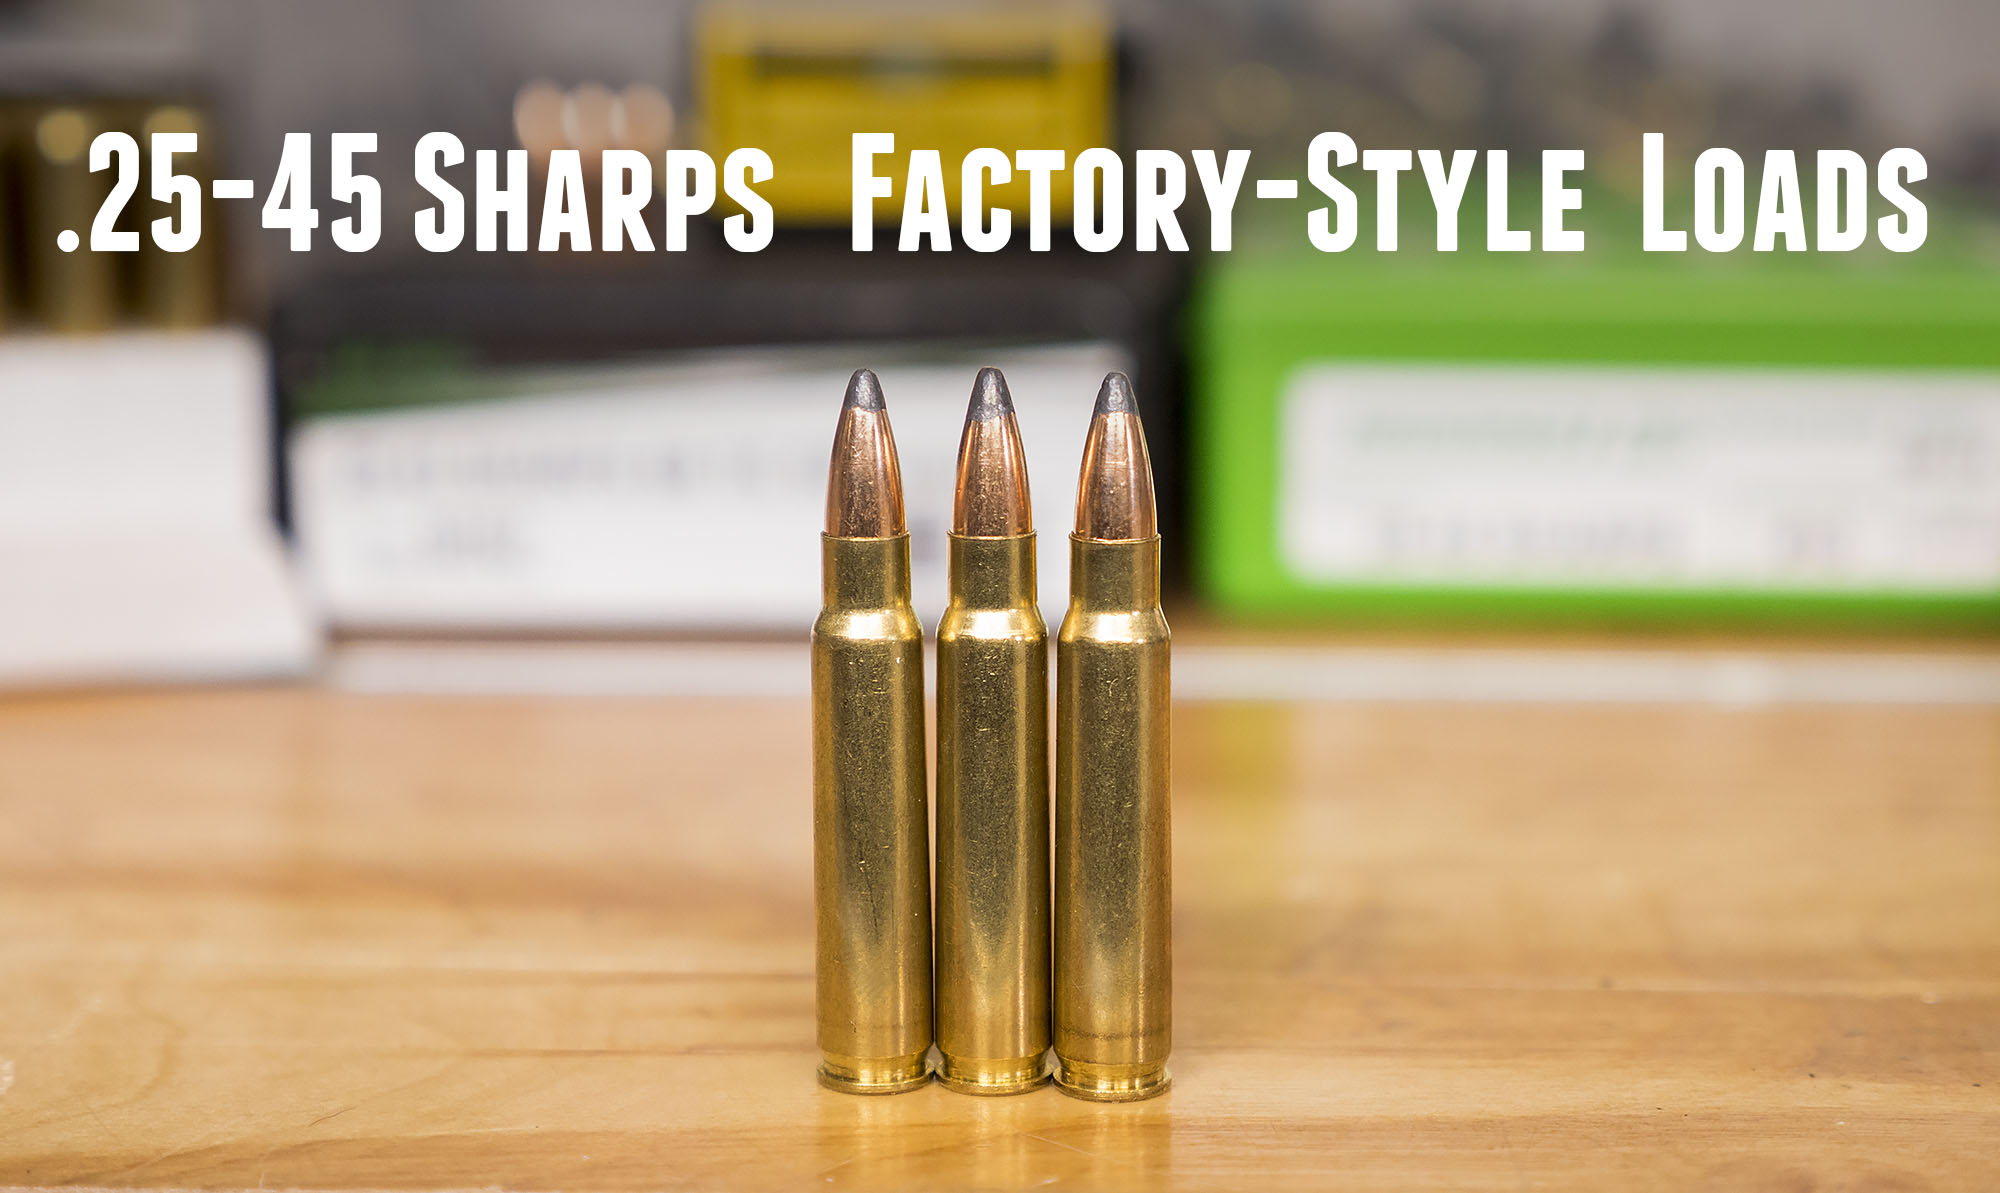 Related image of 25 45 Sharps Ar 15 Part 3 First Loads Ultimate Reloader.